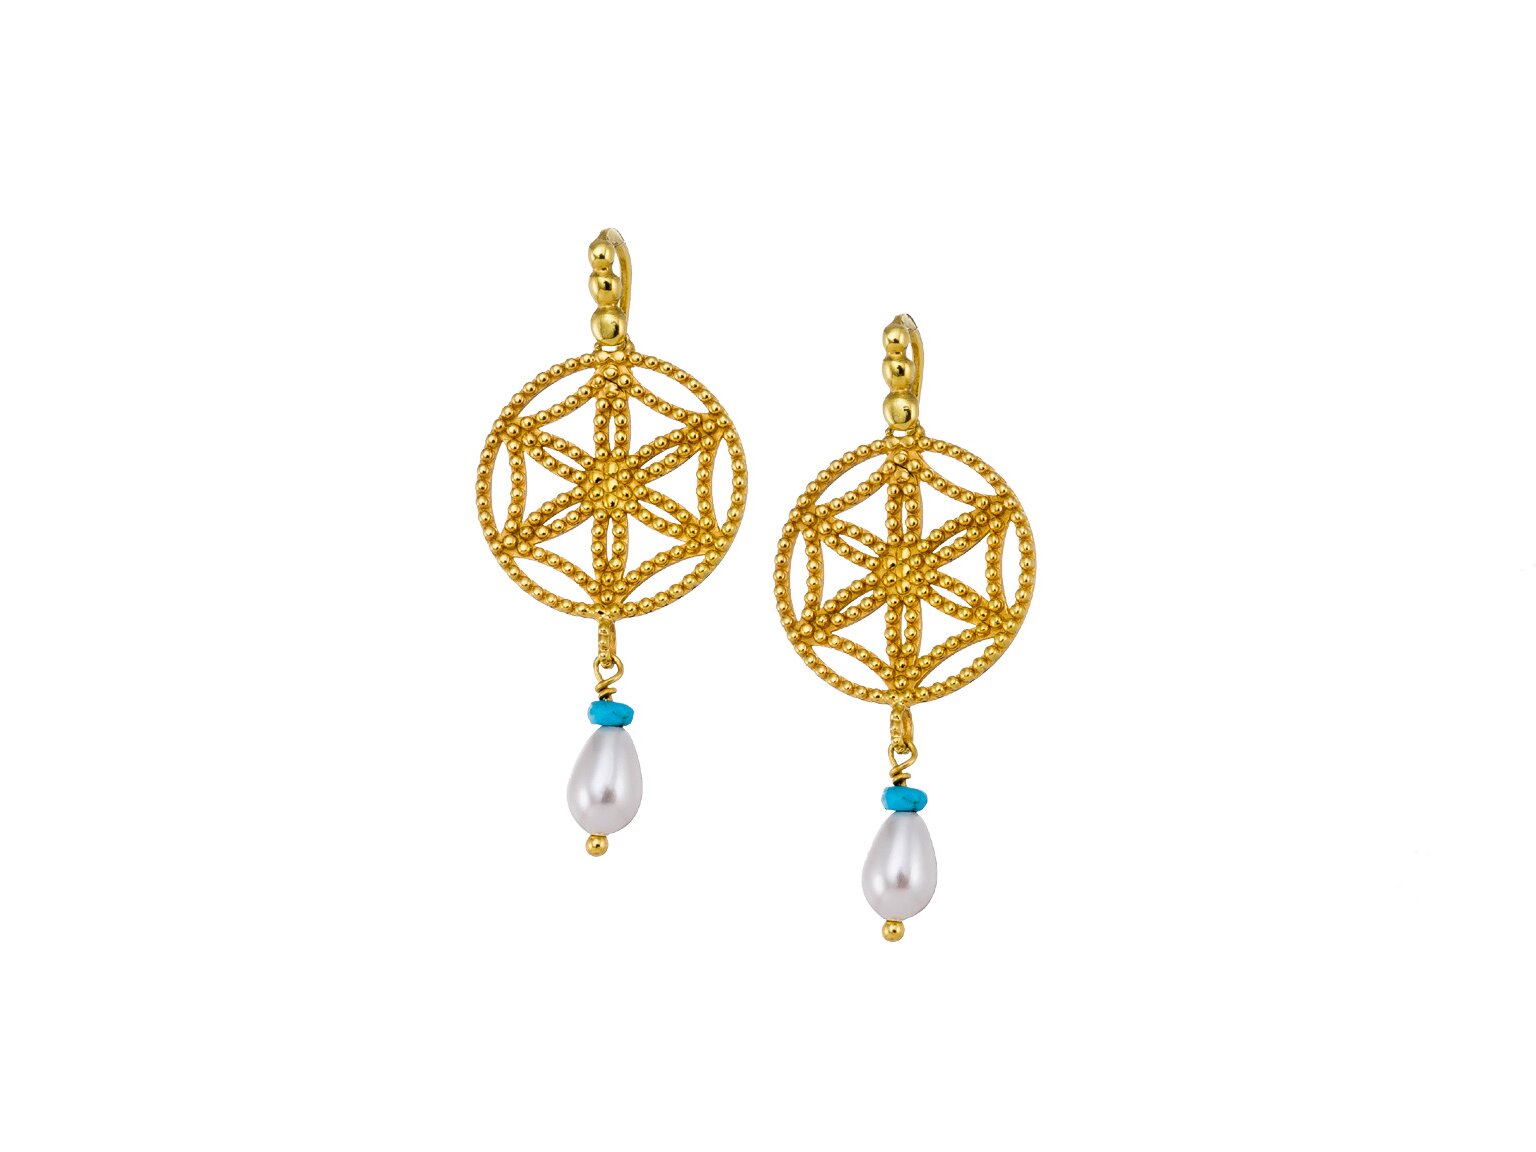 Gold-plated earrings with mother of pearl beads